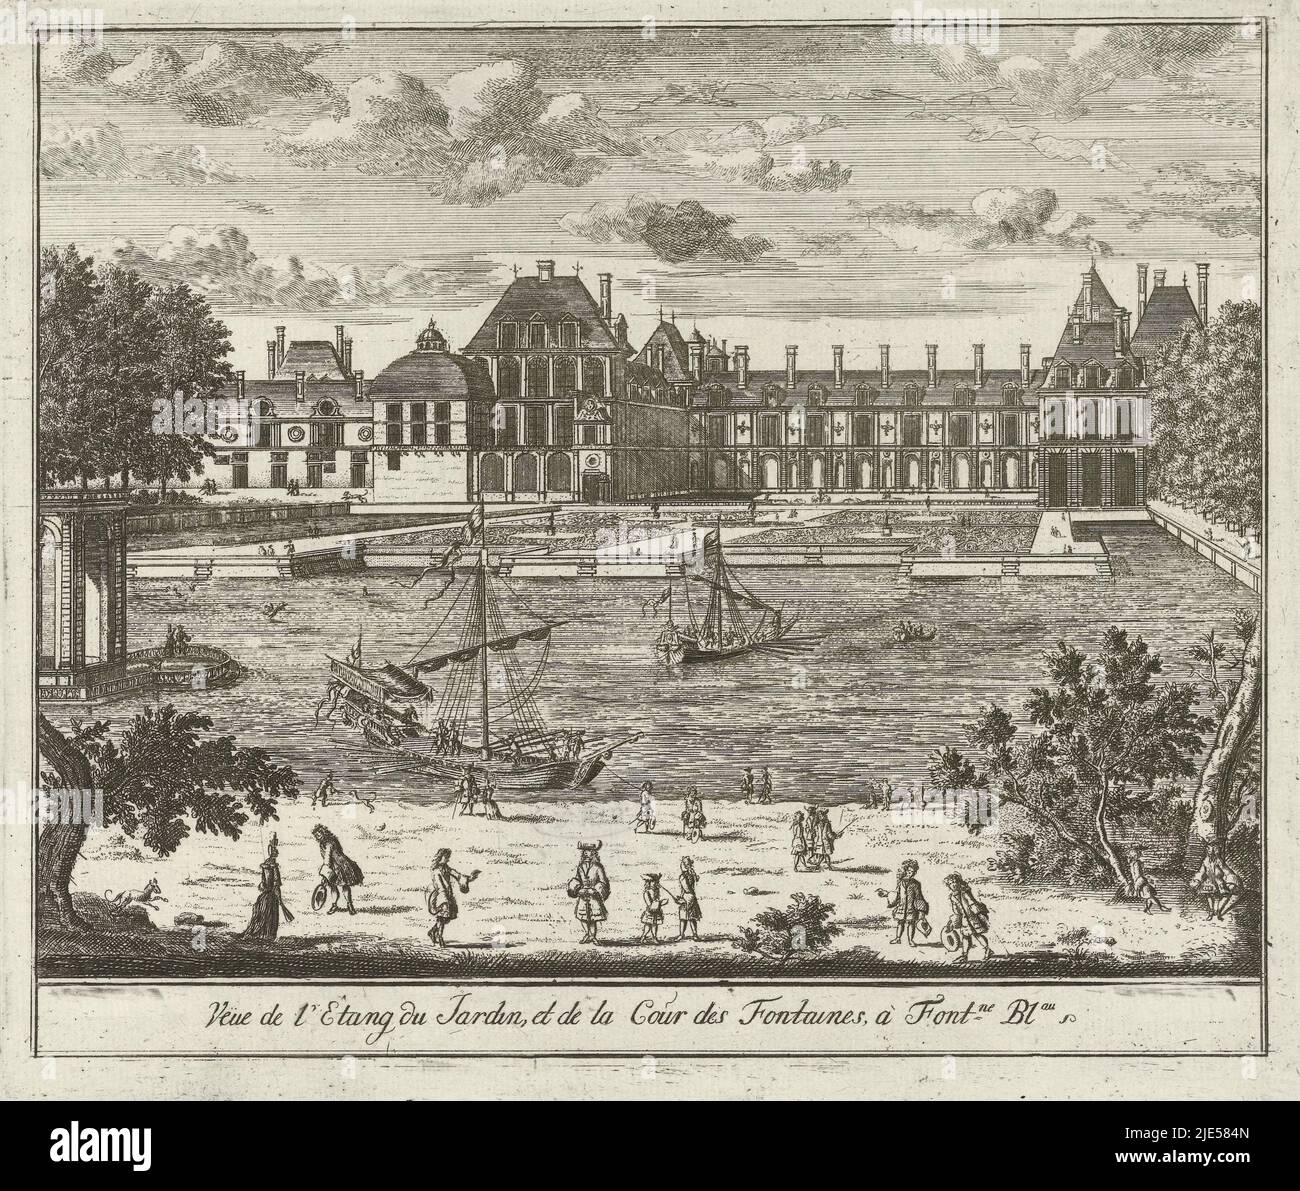 The Cour de la Fontaine in the garden of the Palace of Fontainebleau. Two boats on the water, in the foreground figures by the water's edge, view of the Cour de la Fontaine of the palace of Fontainebleau Veue de l'Etang de Jardin, and of the Cour des Fontaines, in Fontne. Blau, print maker: Jan Lamsvelt, 1726 - 1743, paper, etching, h 172 mm × w 202 mm Stock Photo